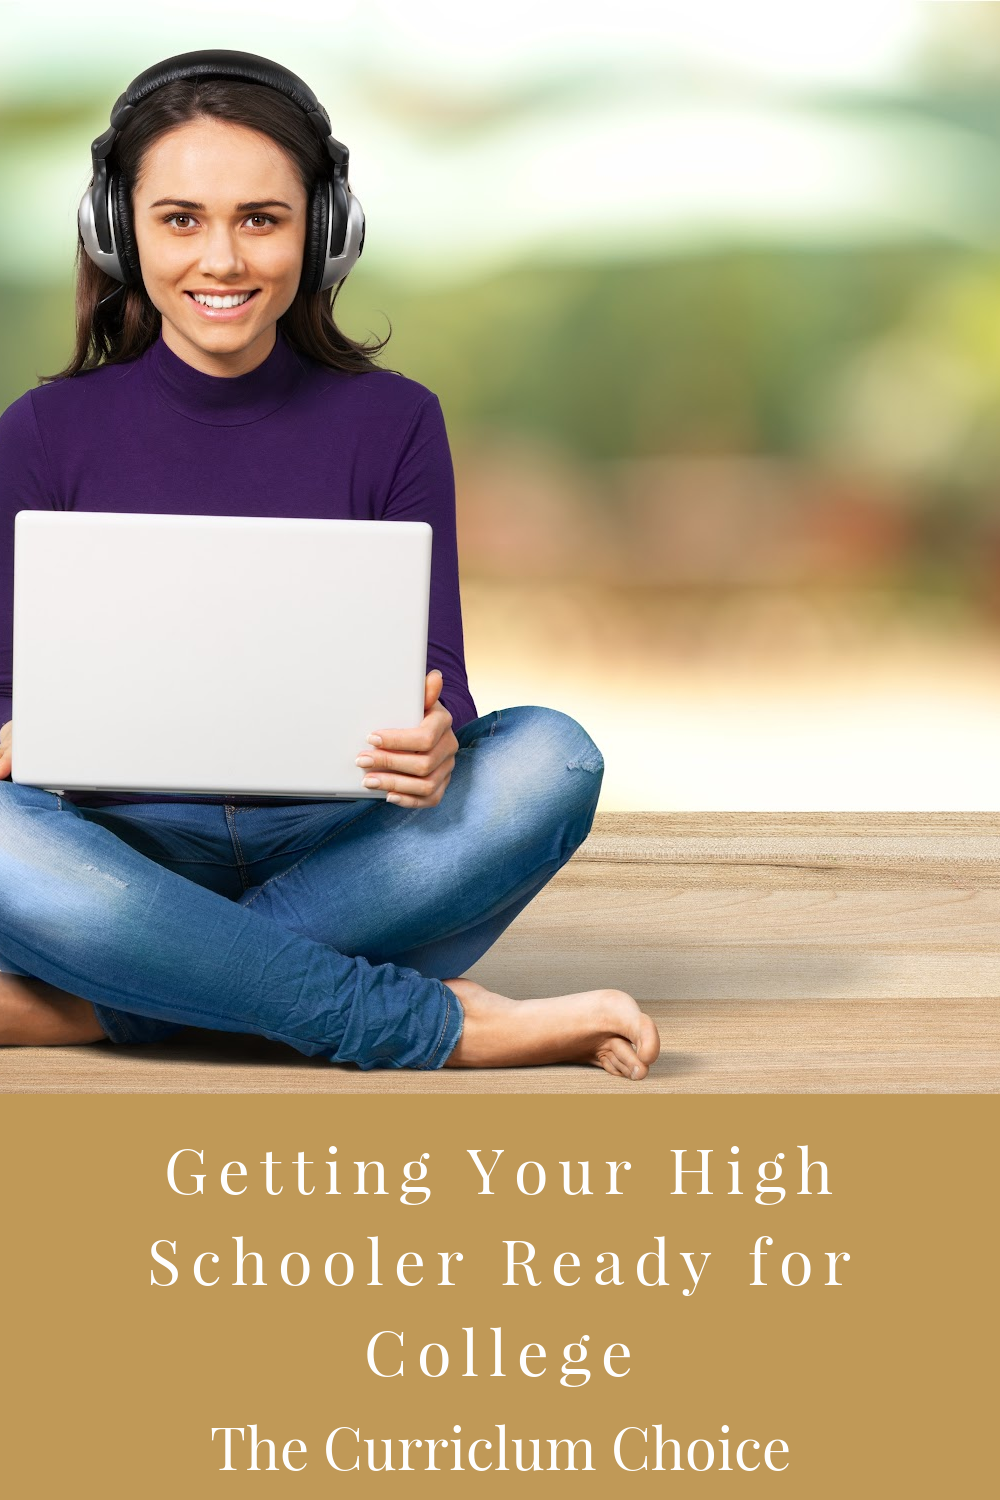 Getting Your Homeschooled High Schooler Ready for College